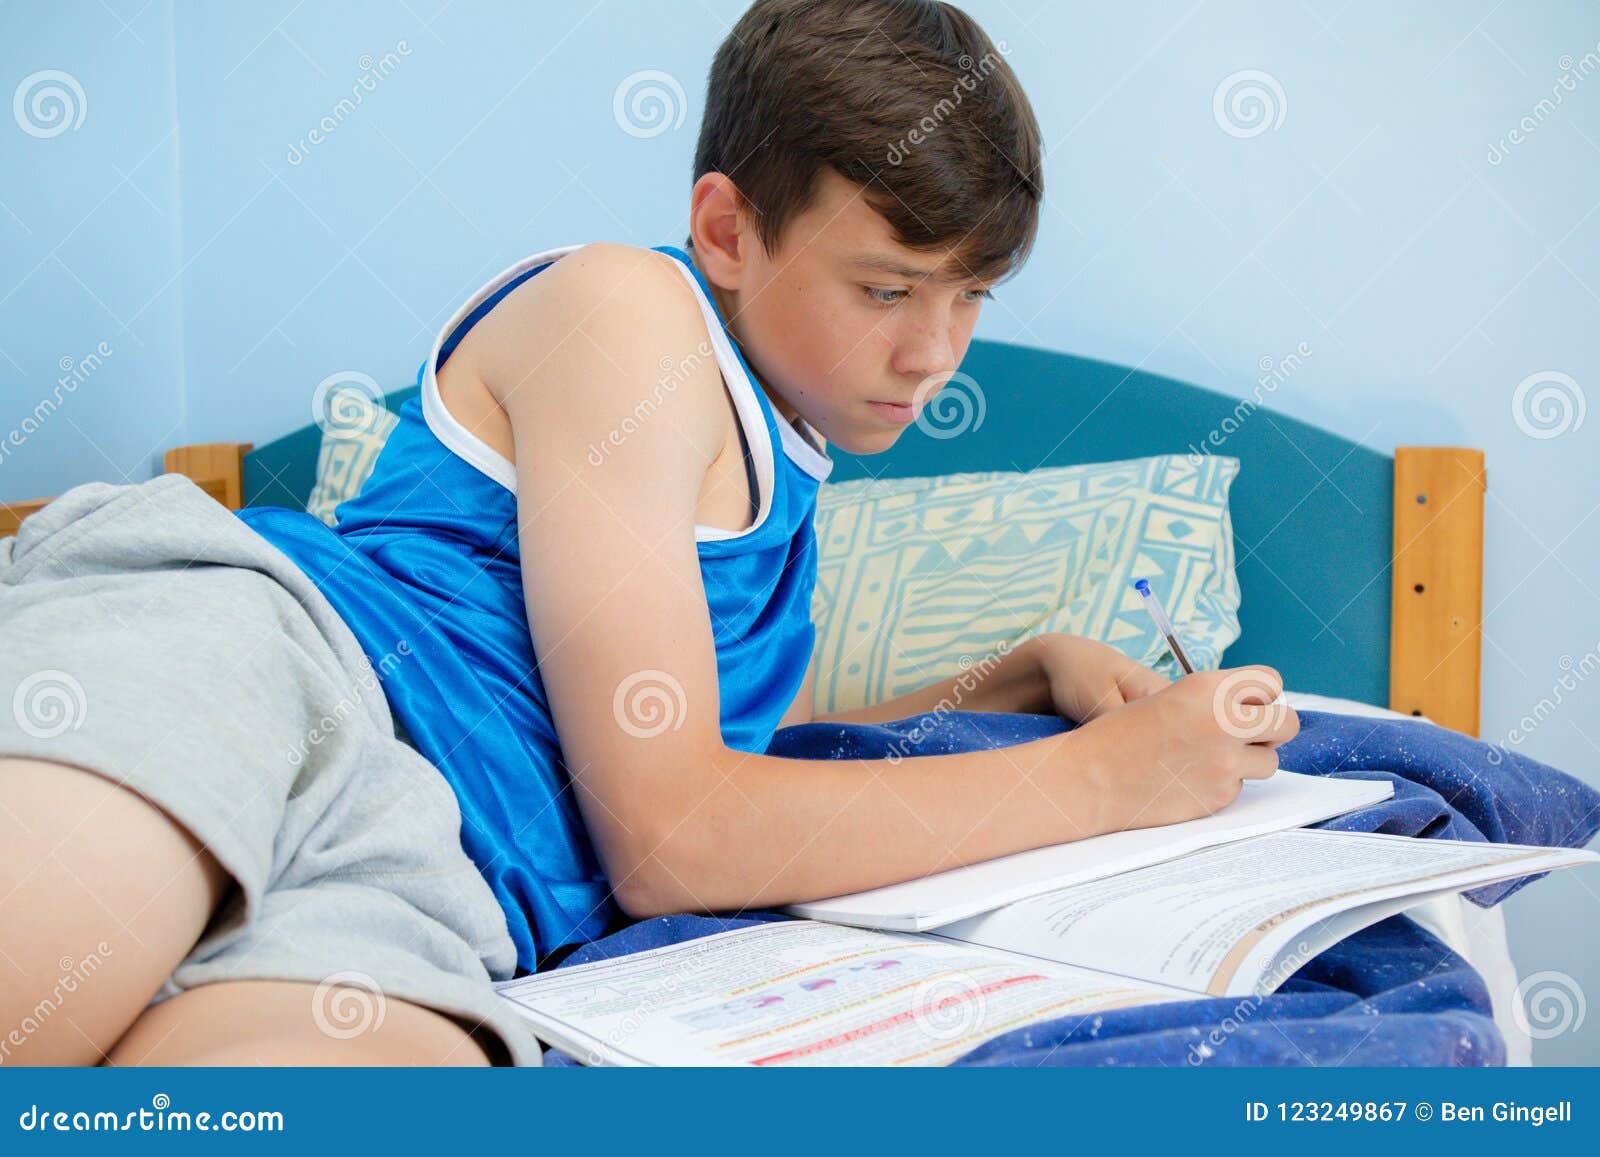 after he his homework he went to bed